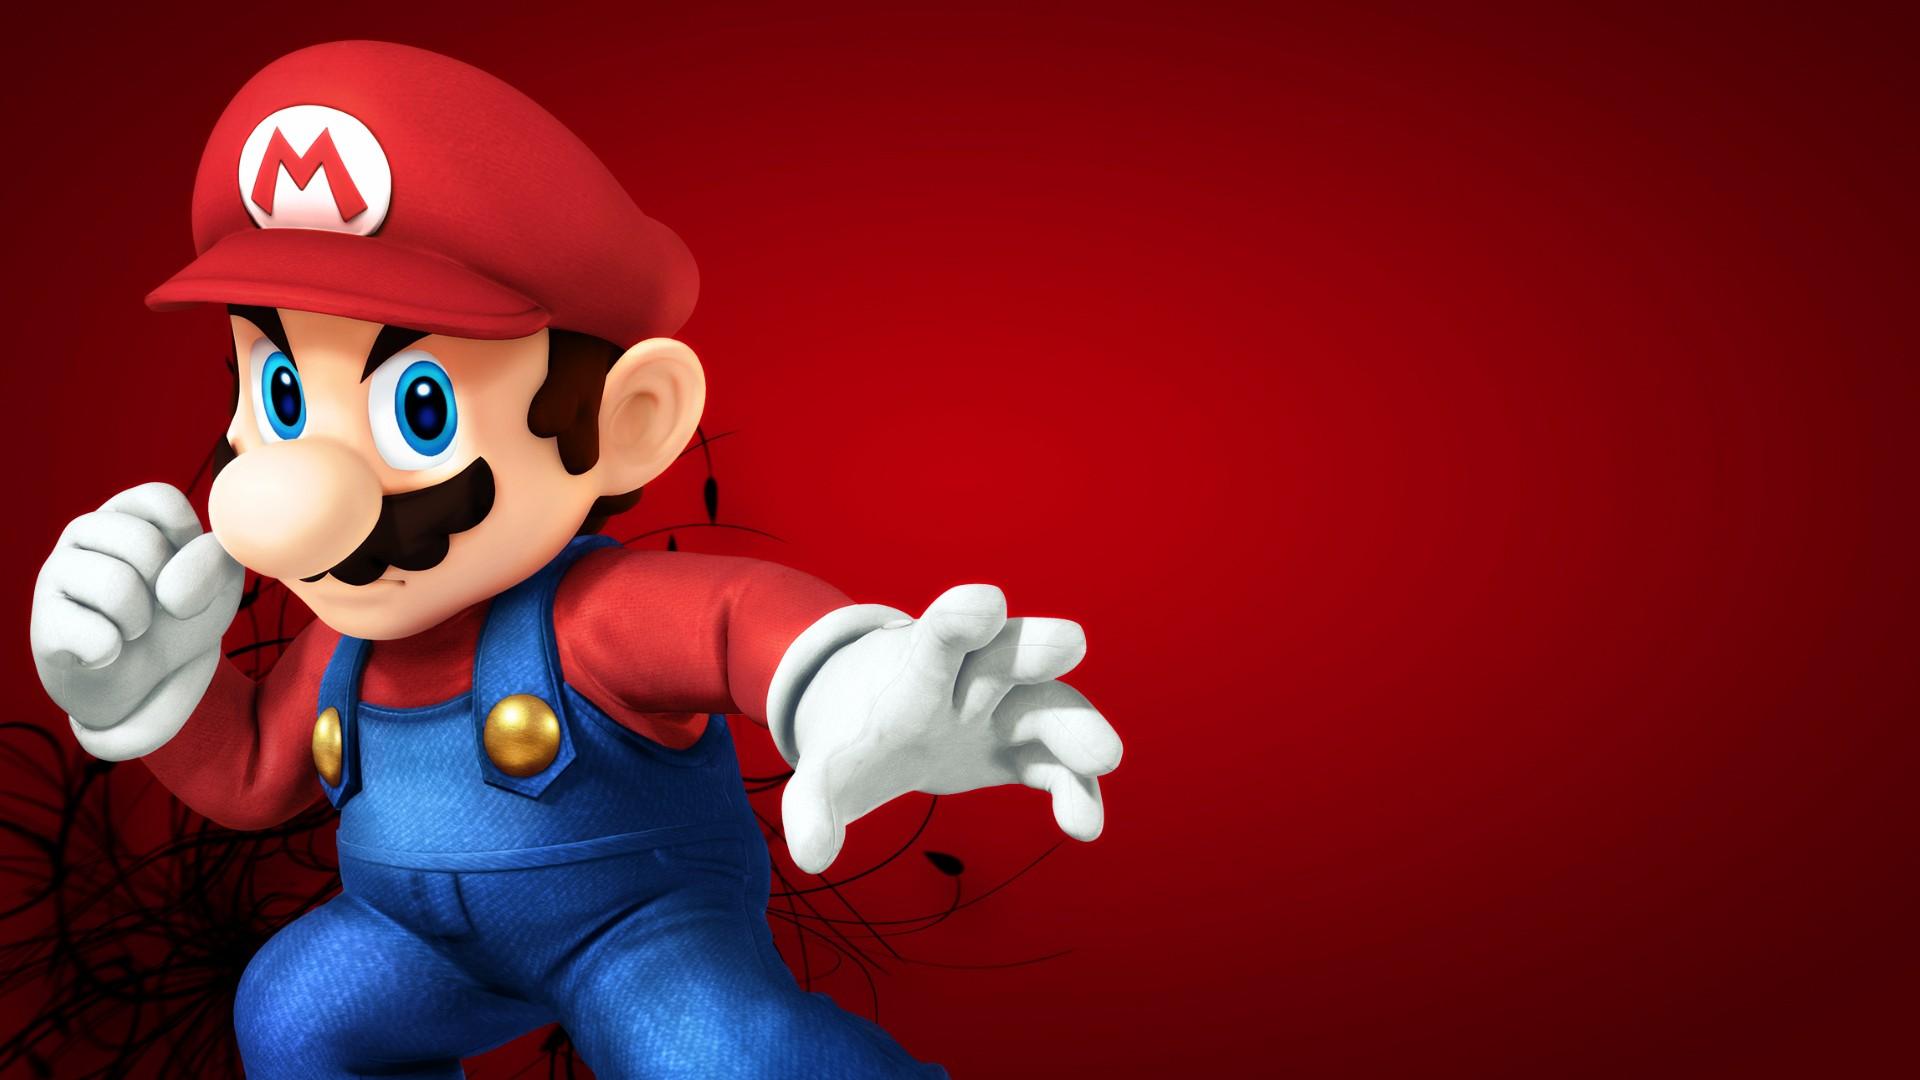 1920 x 1080 · jpeg - Super Mario wallpaper 1 Download free cool wallpapers for desktop and ...